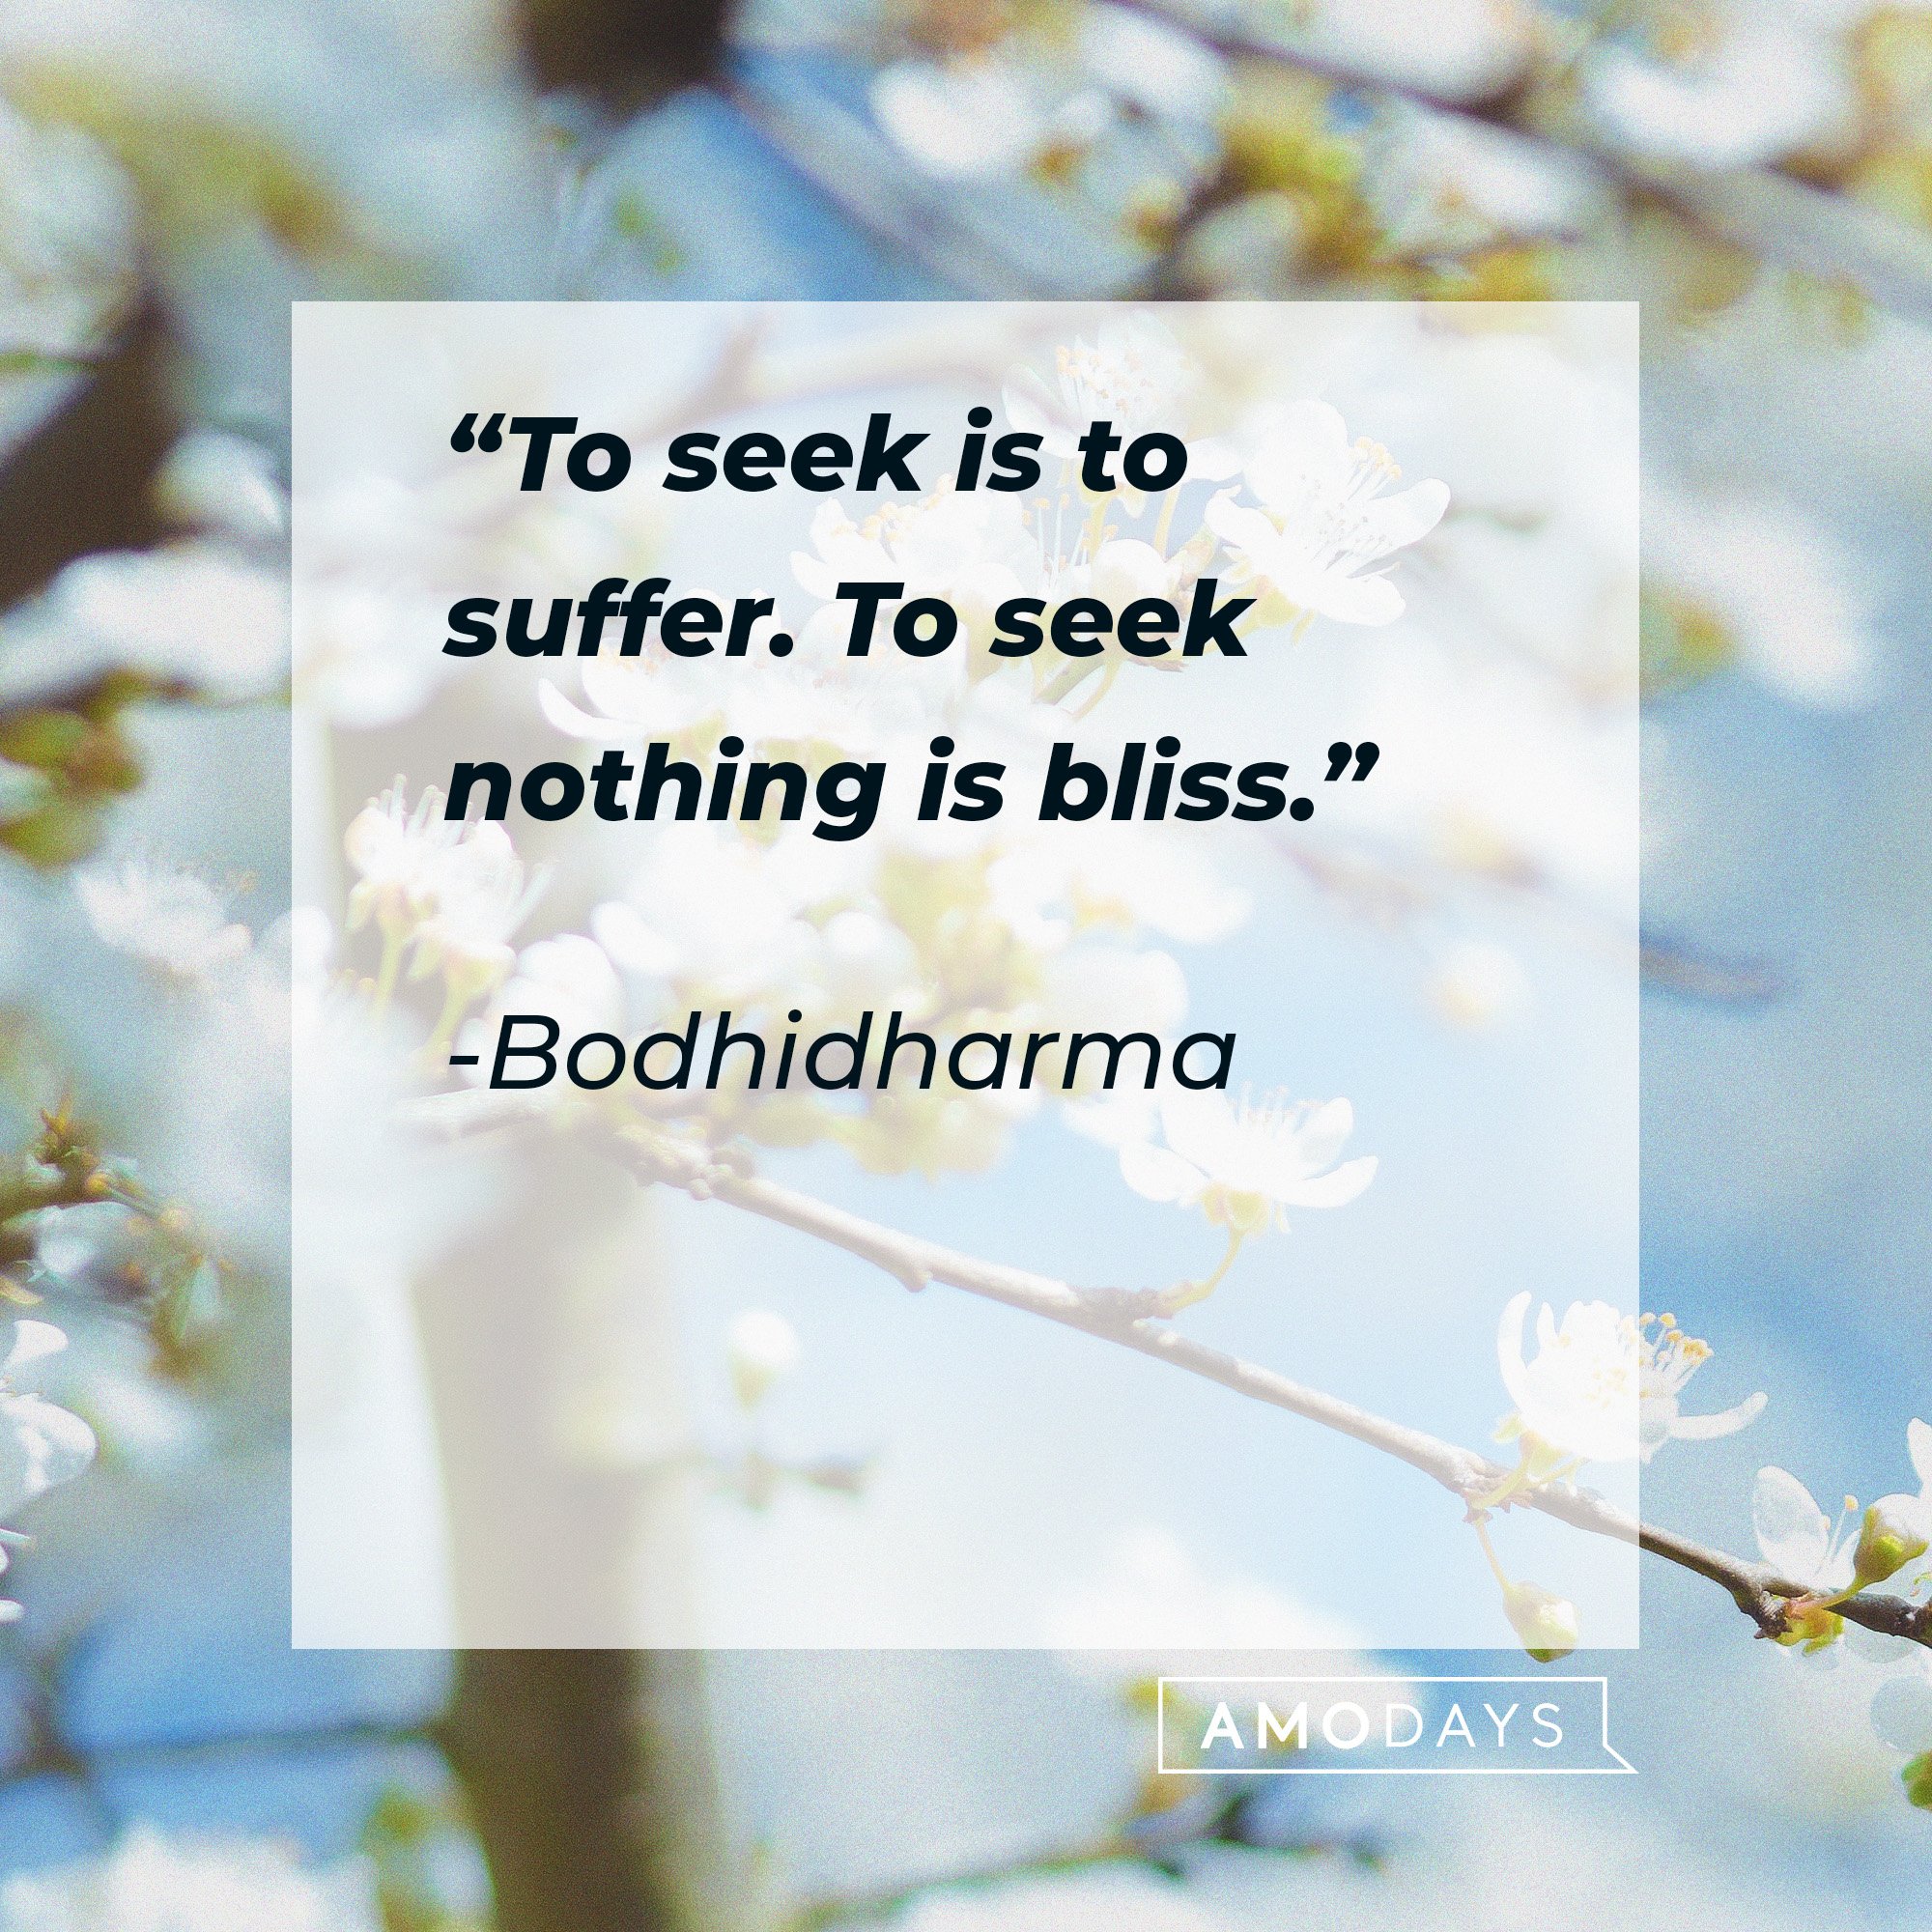  Bodhidharma's quote: “To seek is to suffer. To seek nothing is bliss.” | Imag: AmoDays